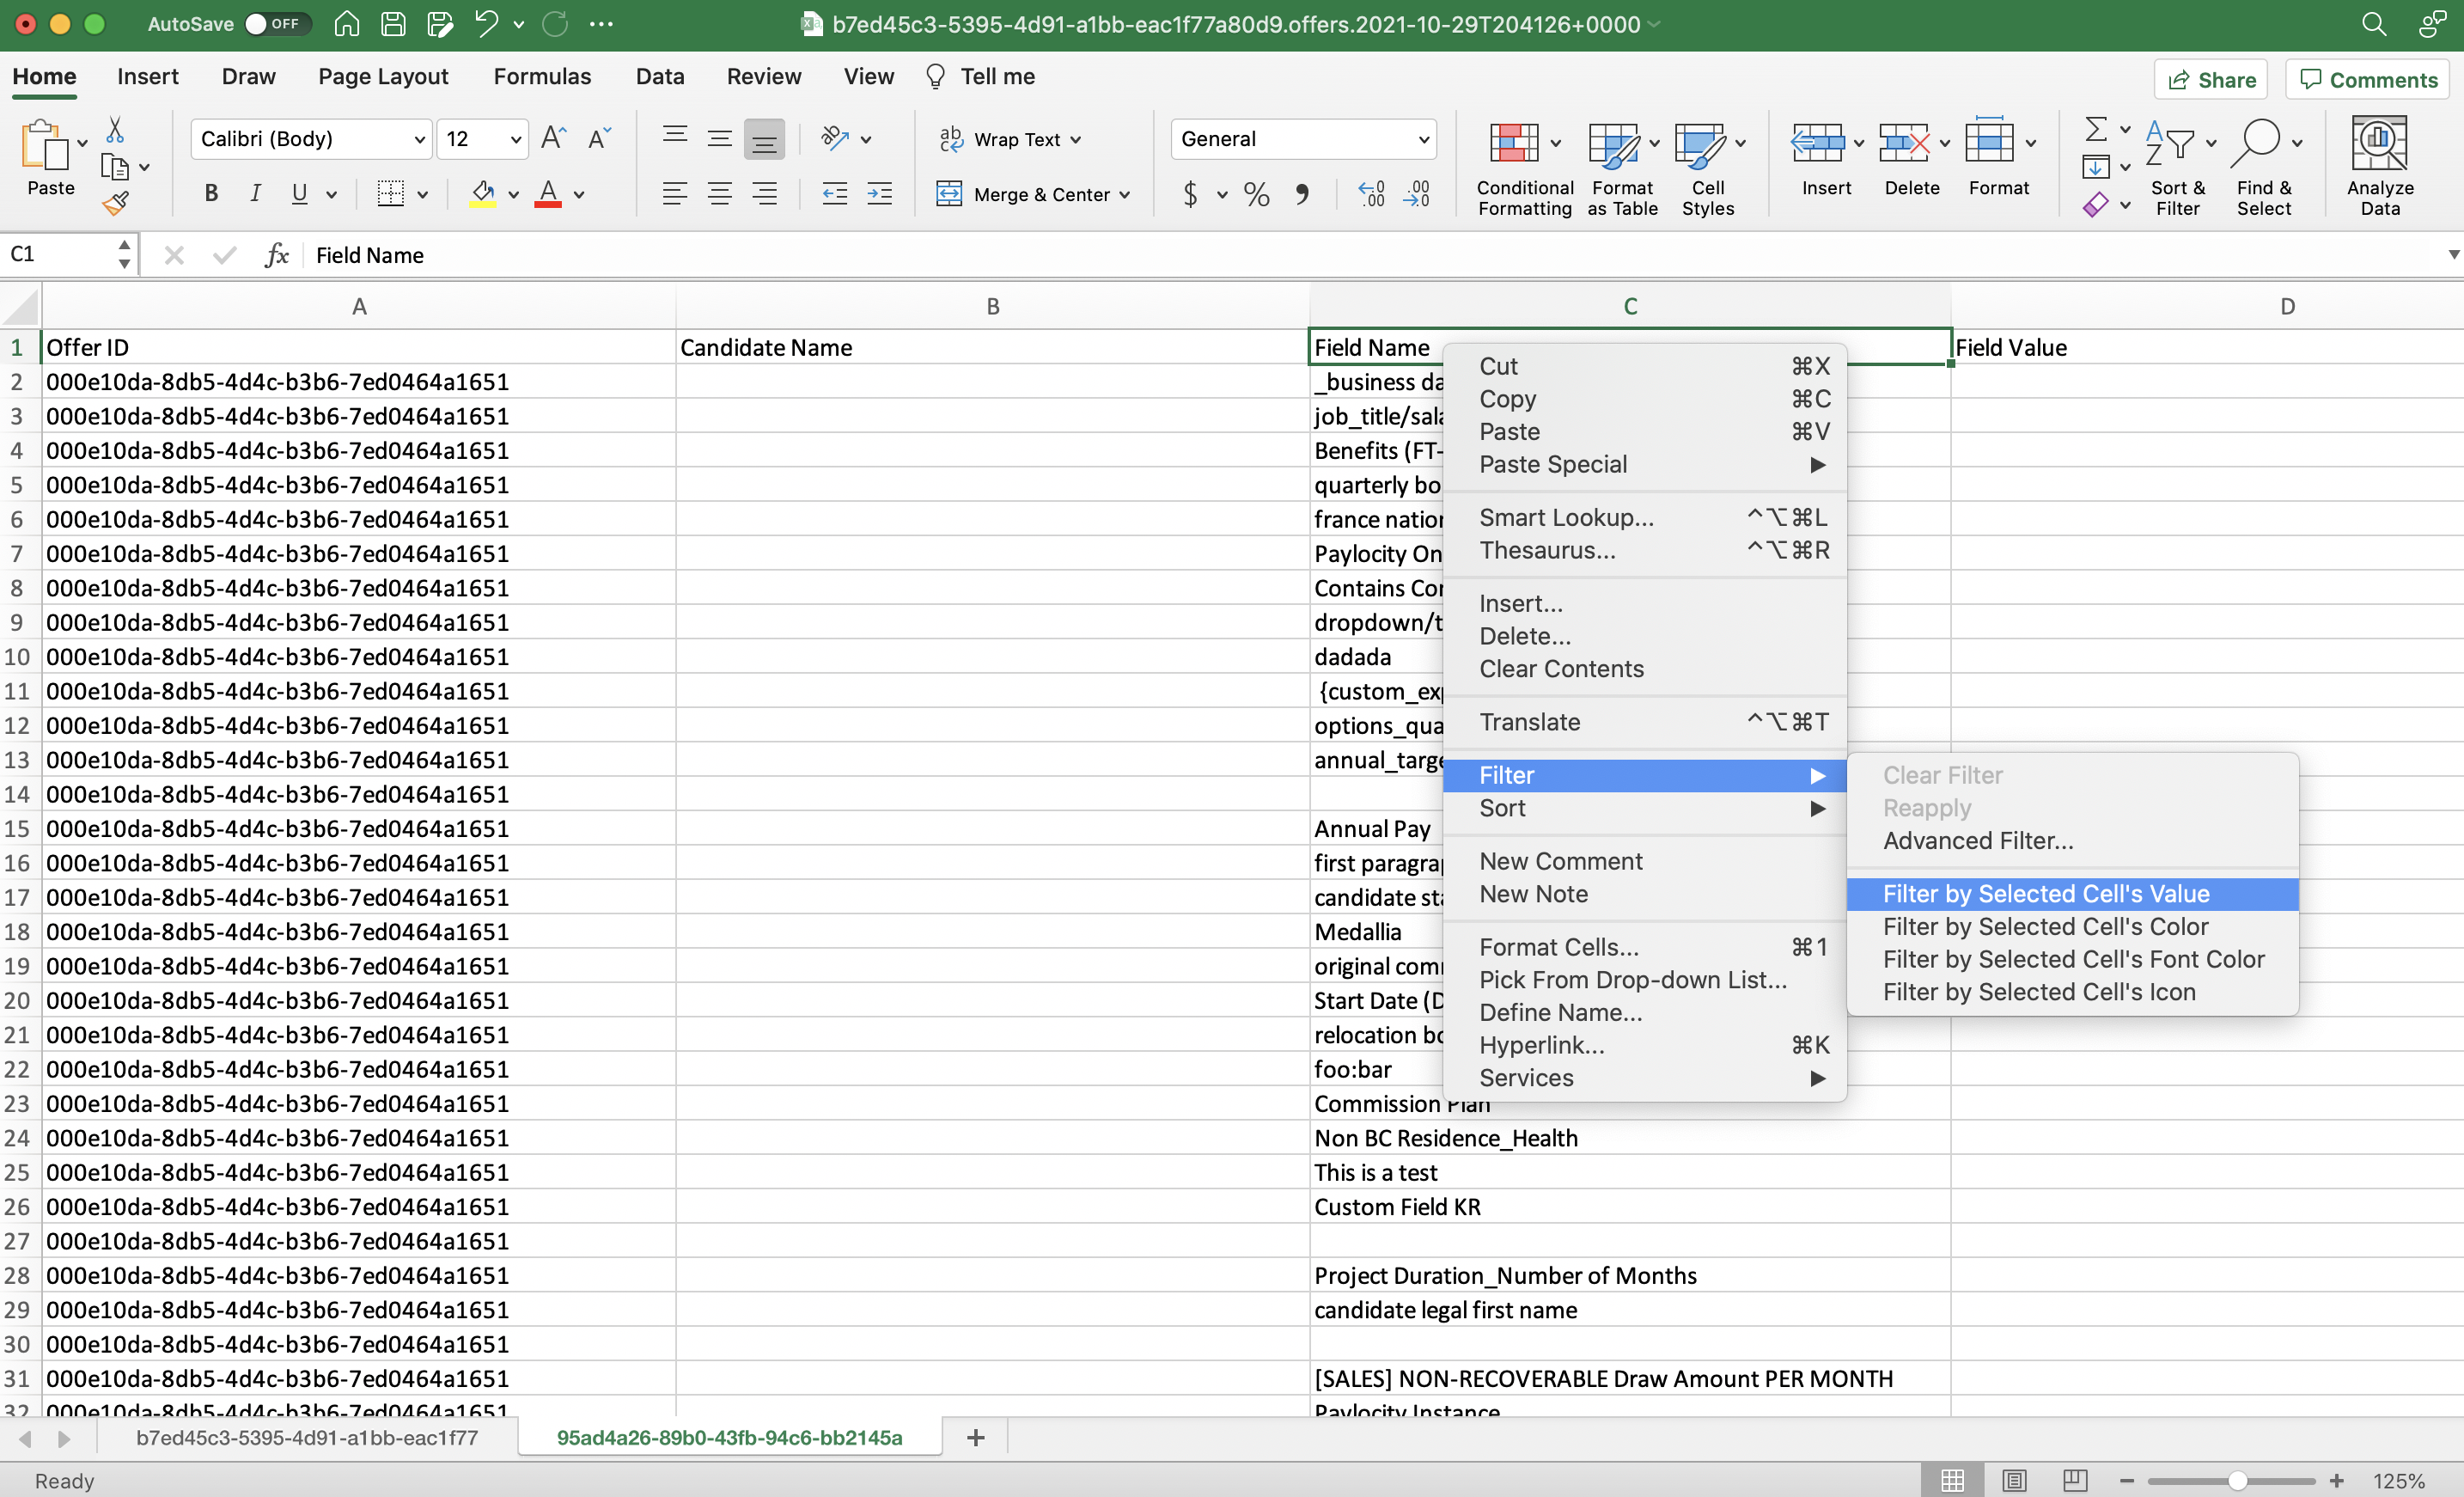 Menu expanded from cell C1 in Offers custom fields spreadsheet; Filter and Filter by Selected Cell's Value options are highlighted.